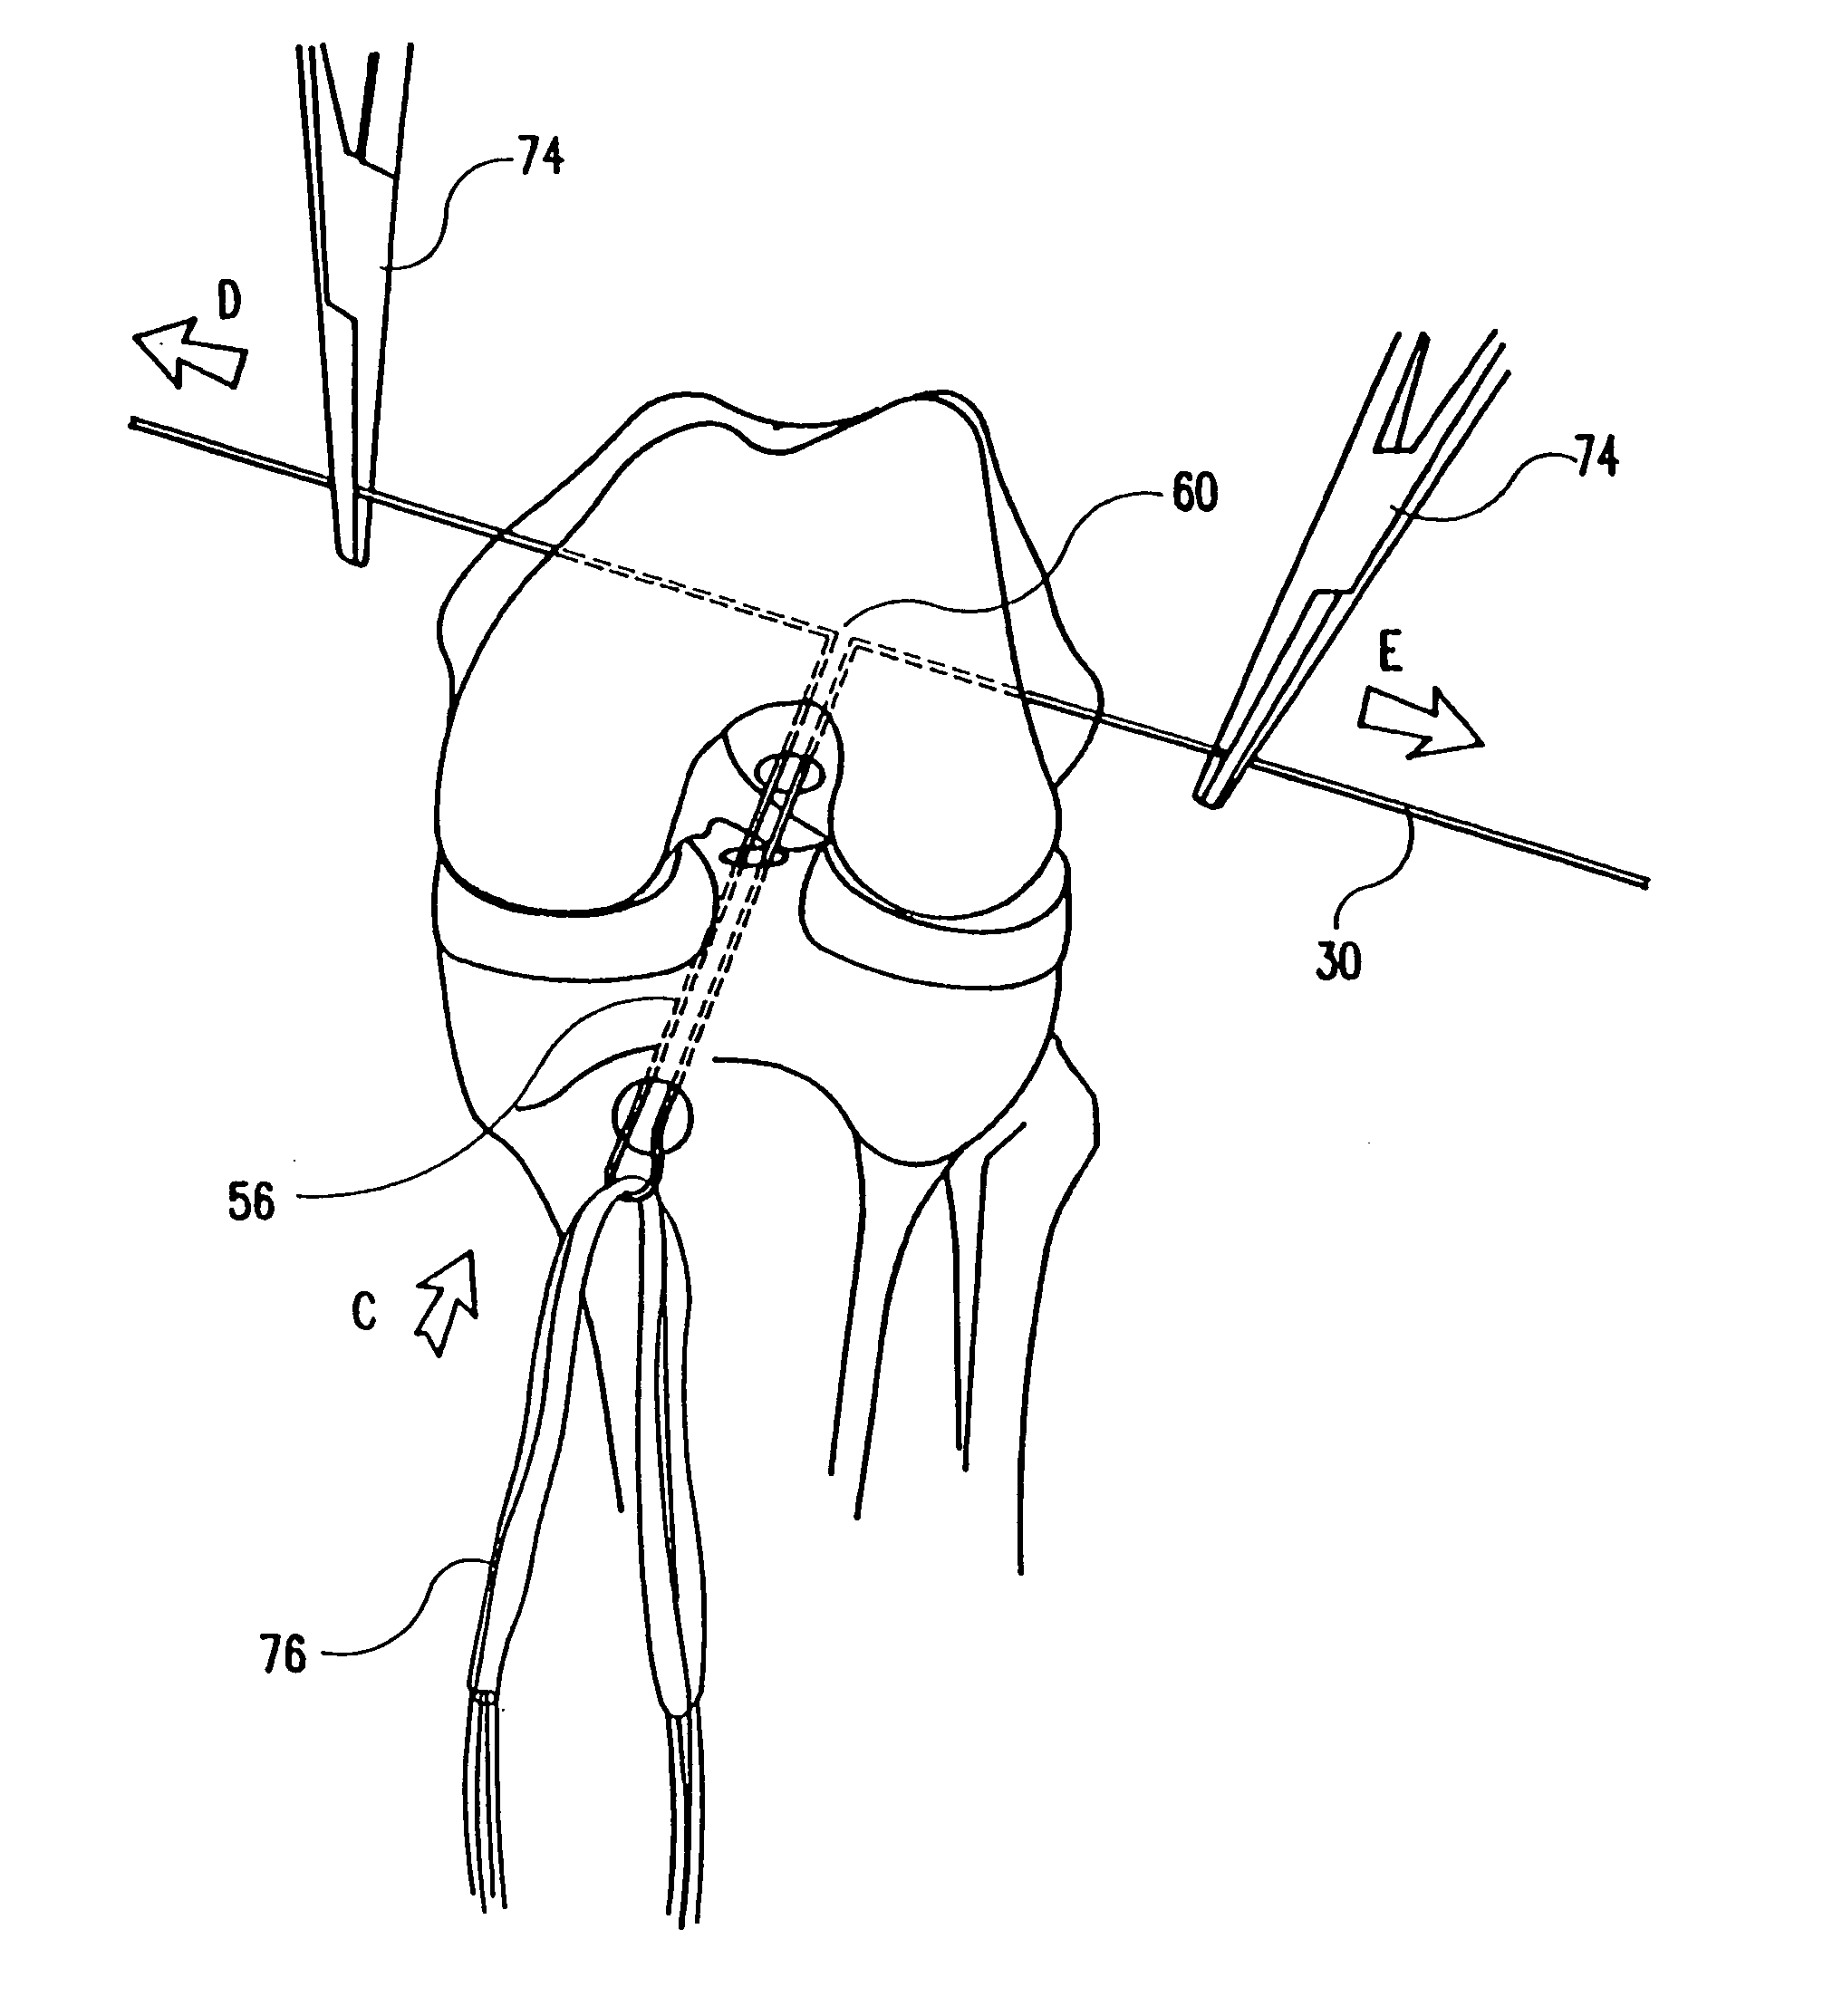 Method of loading tendons into the knee